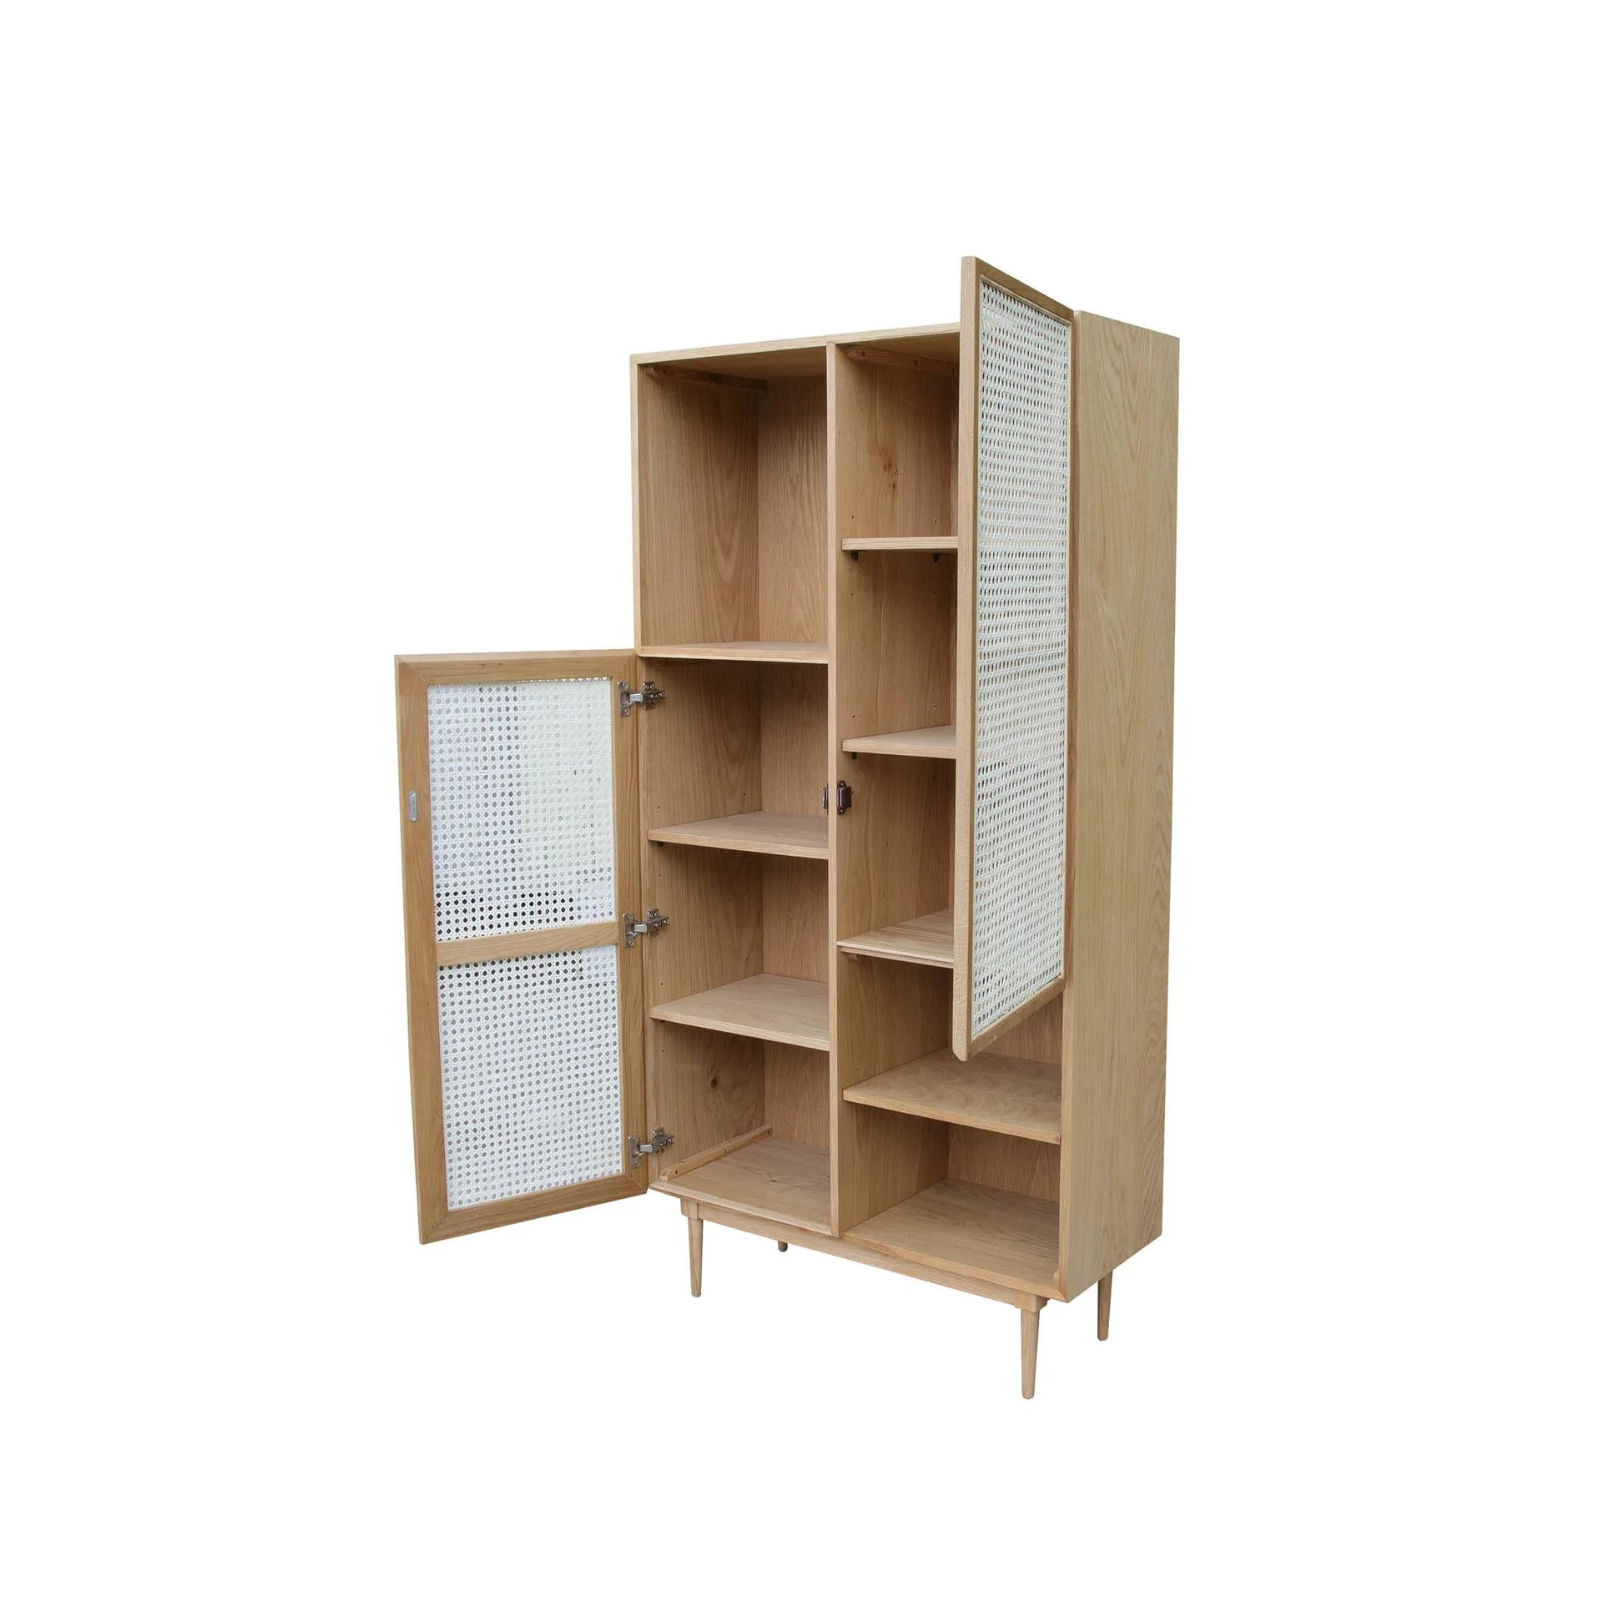 Christopher Bookcase Natural - Rug & Weave